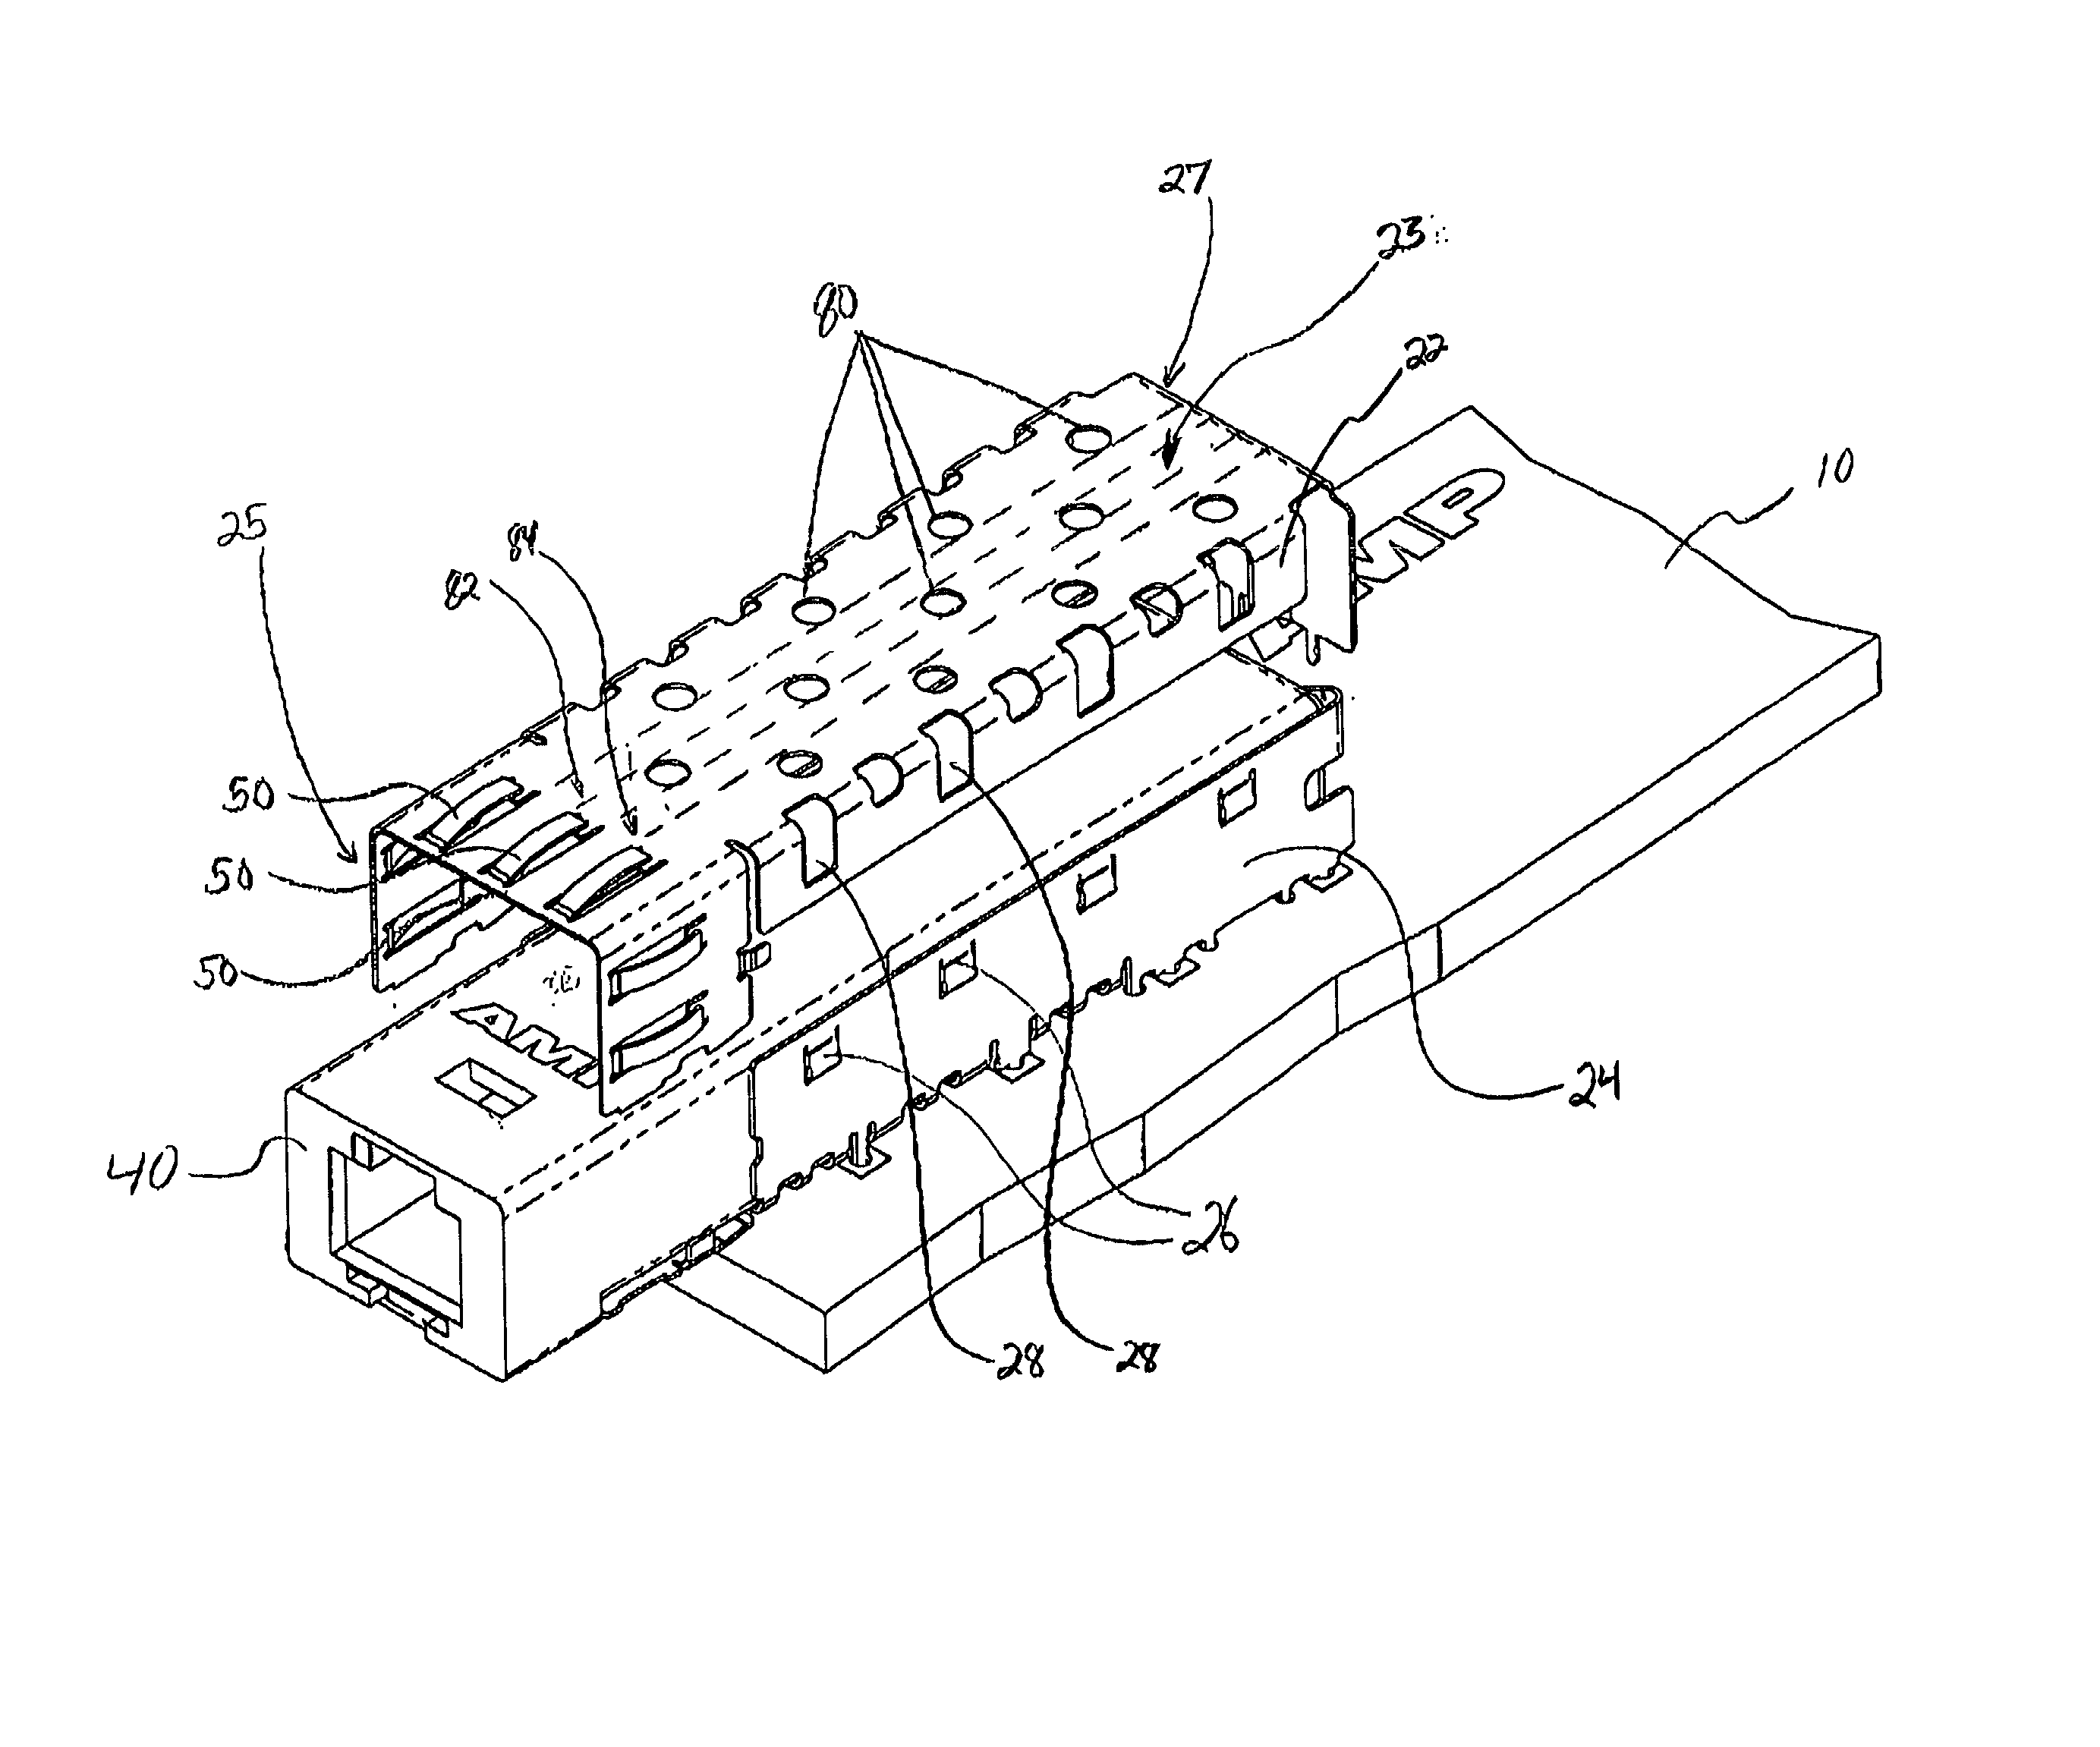 Pluggable module and receptacle